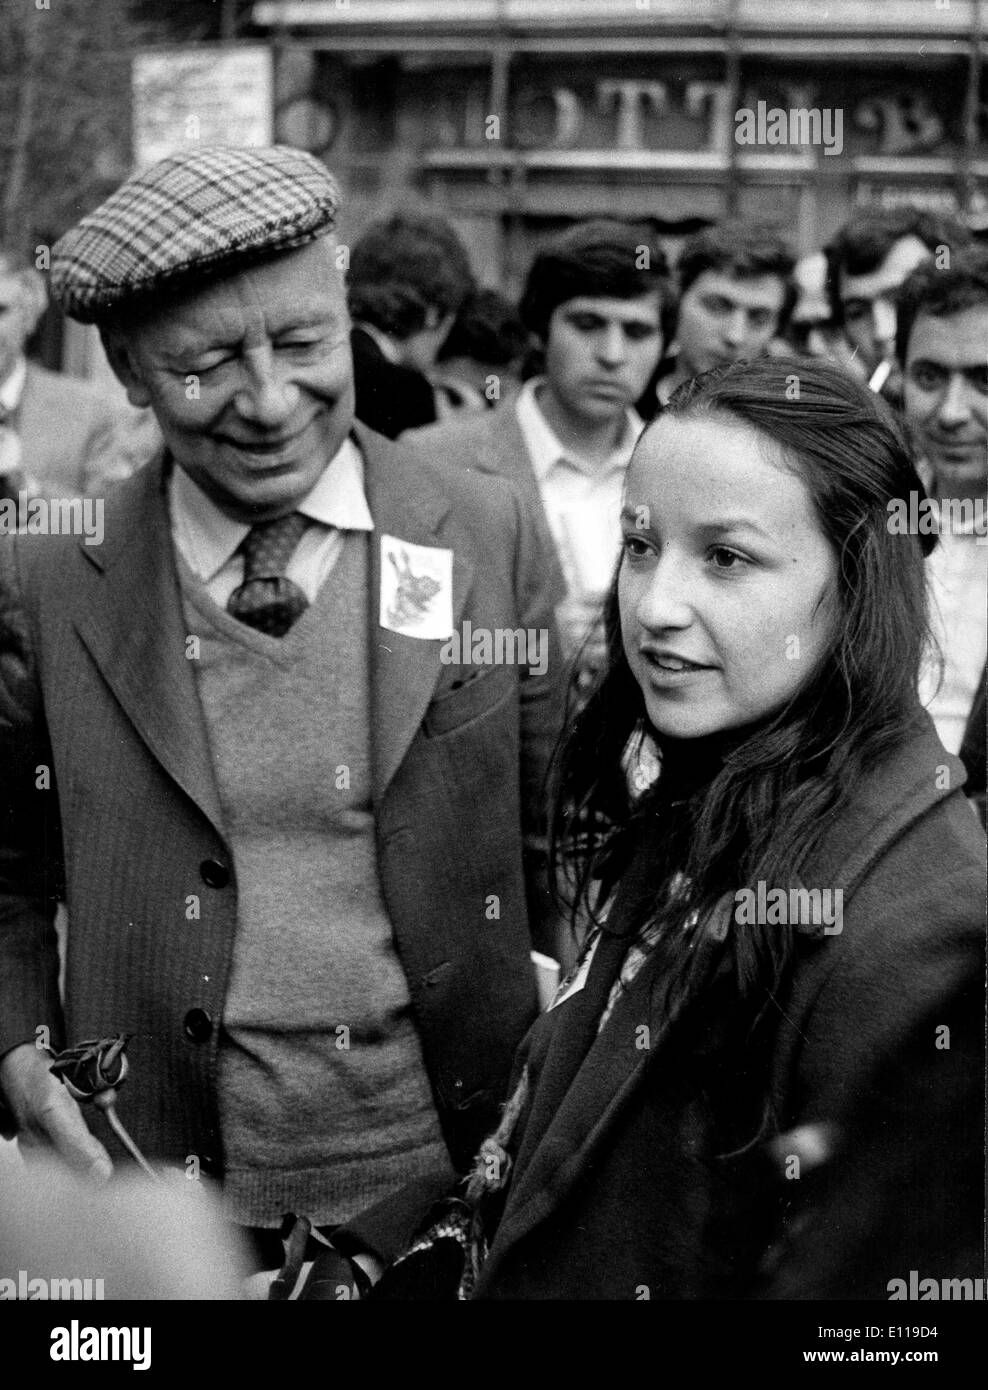 Apr 30, 1976 - Rome, Italy - (File Photo) LUIS CORVALAN (Luis Alberto Corvalan Castillo) is a Chilean politician, and the former Secretary-General of the Communist Party of Chile (PCC). He was arrested by the Pinochet regime and became a political prisoner in 1973. The USSR arranged for his release and exile in 1976. He returned to Chile after the end of Pinochet's dictatorship. PICTURED: VIVIANA CORVALAN, right, in Rome seeking the release of her father, with Italian communist politician GIANCARLO PAJETTA. Stock Photo